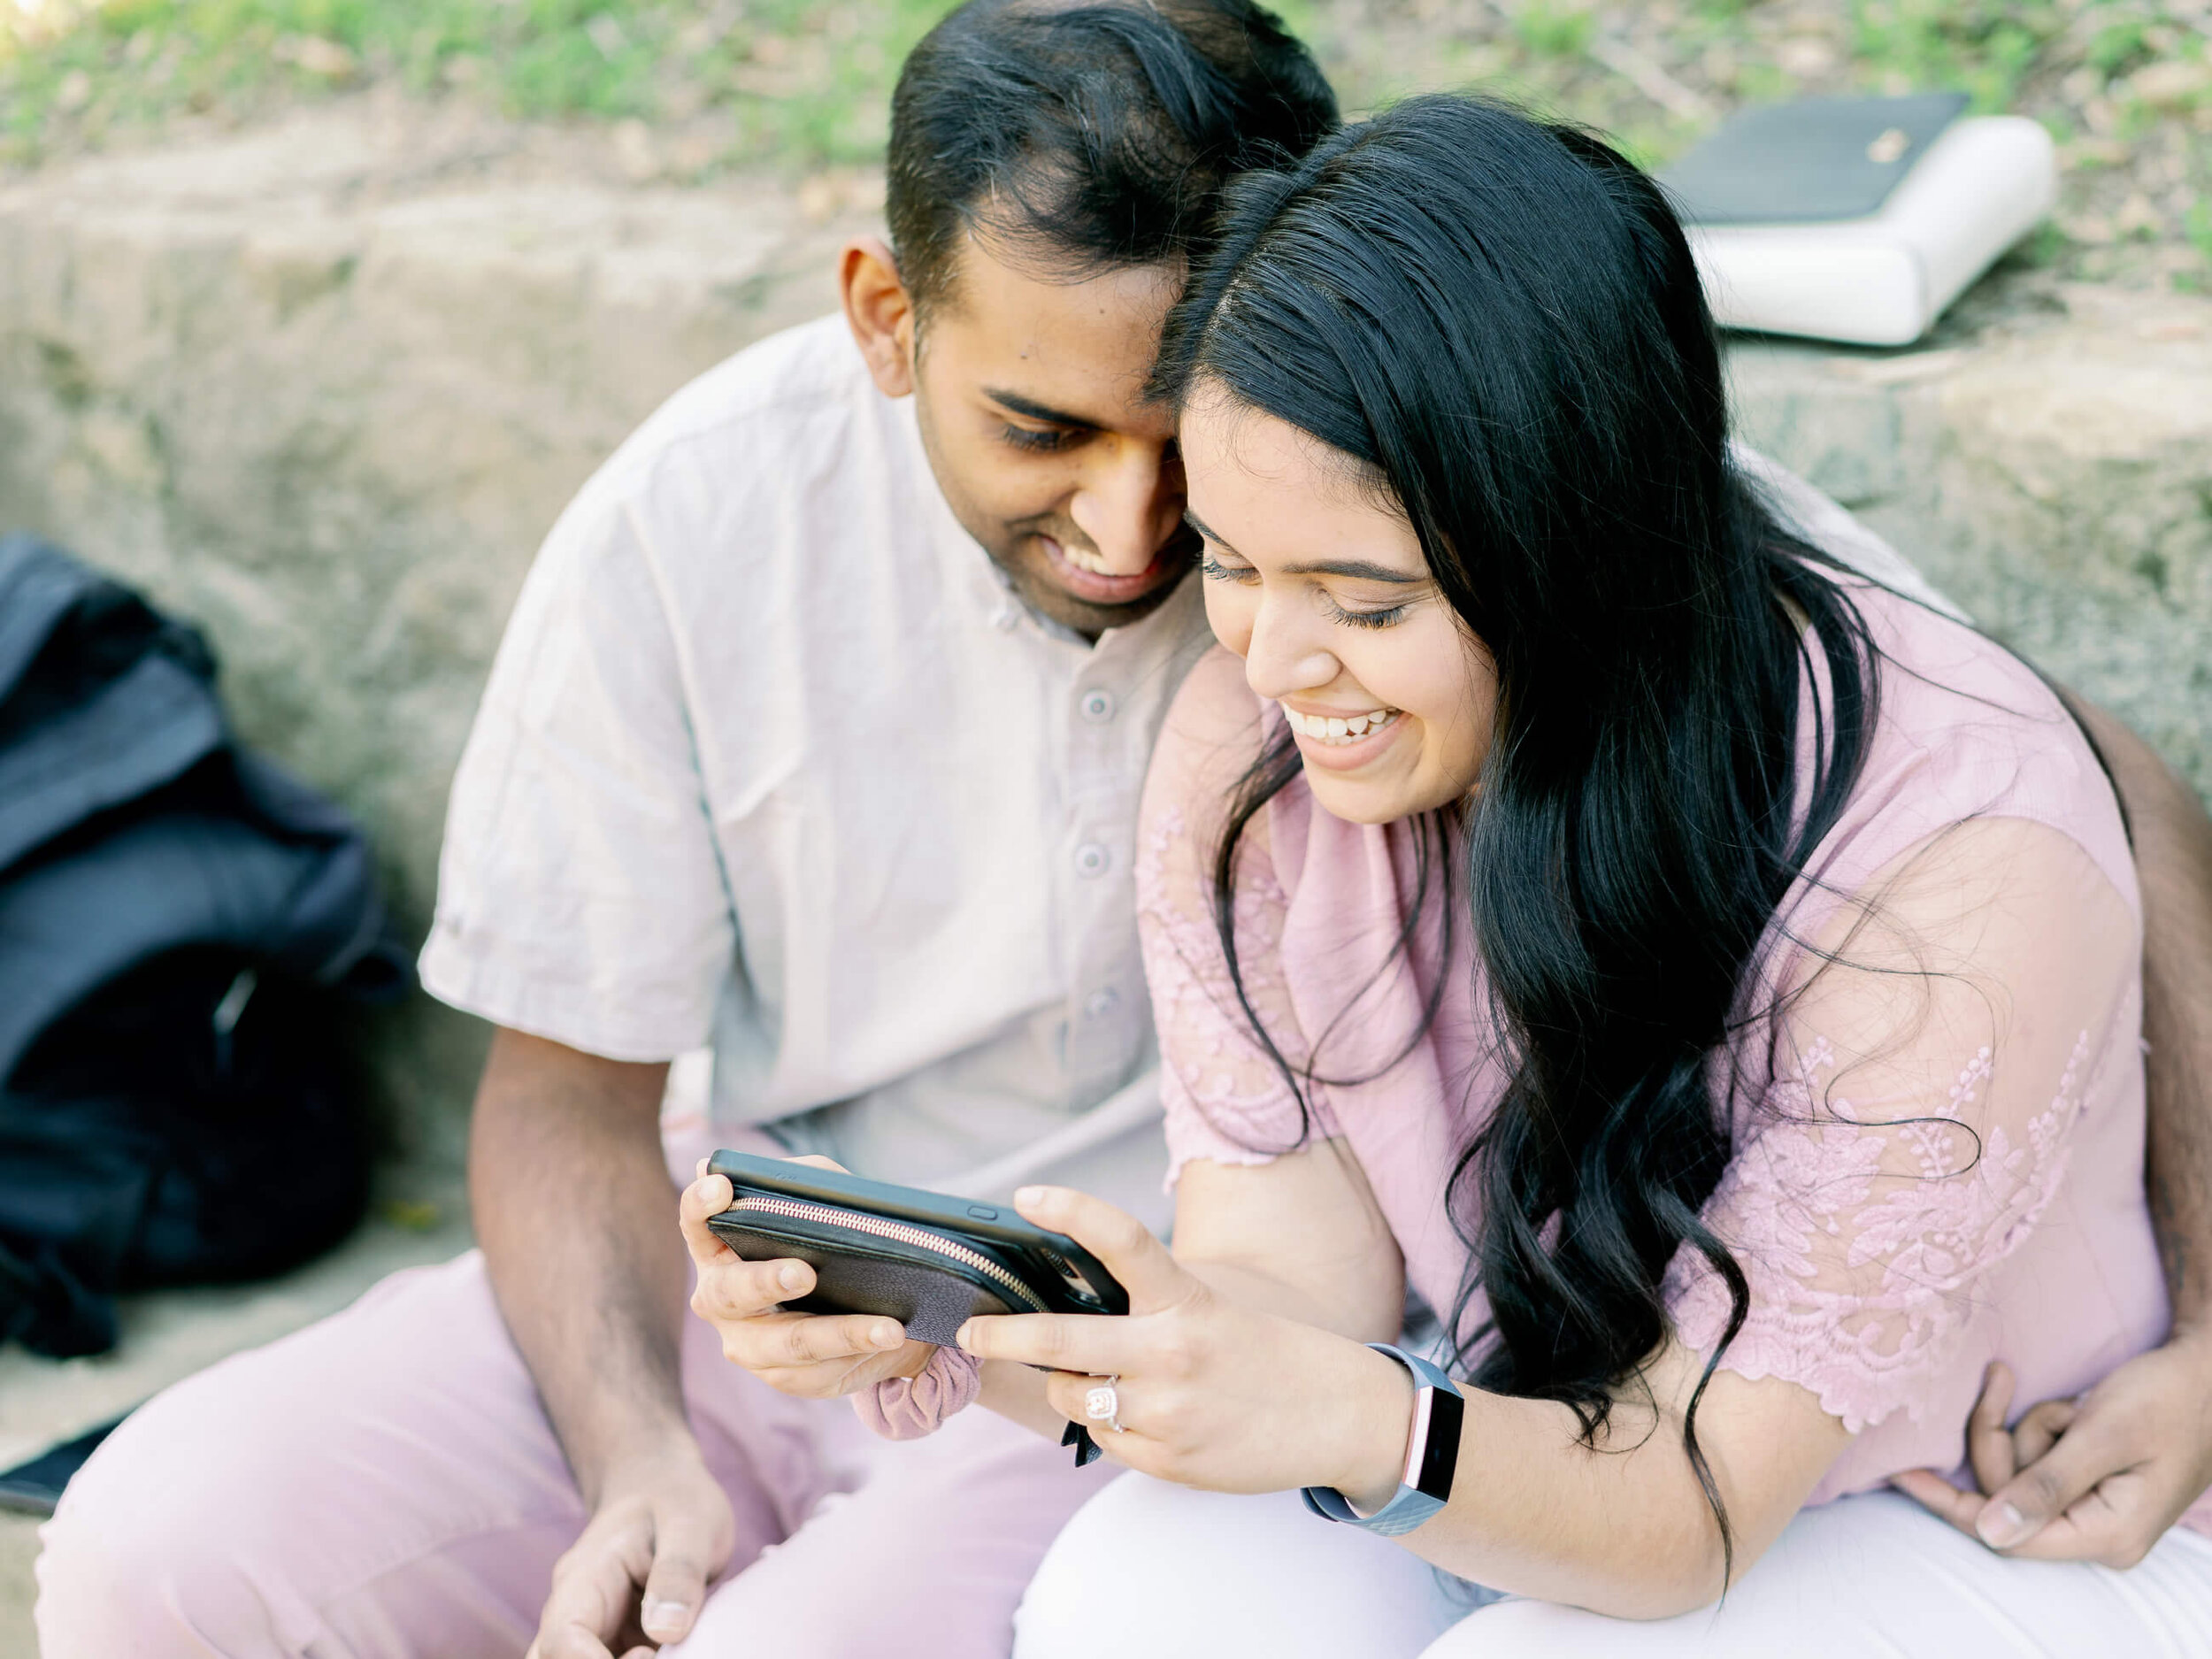  All their family and friends knew ahead of time that Pavan was going to propose, so he had everyone record videos of their congratulatory wishes that Mal got to watch right after the proposal! It was so sweet! 